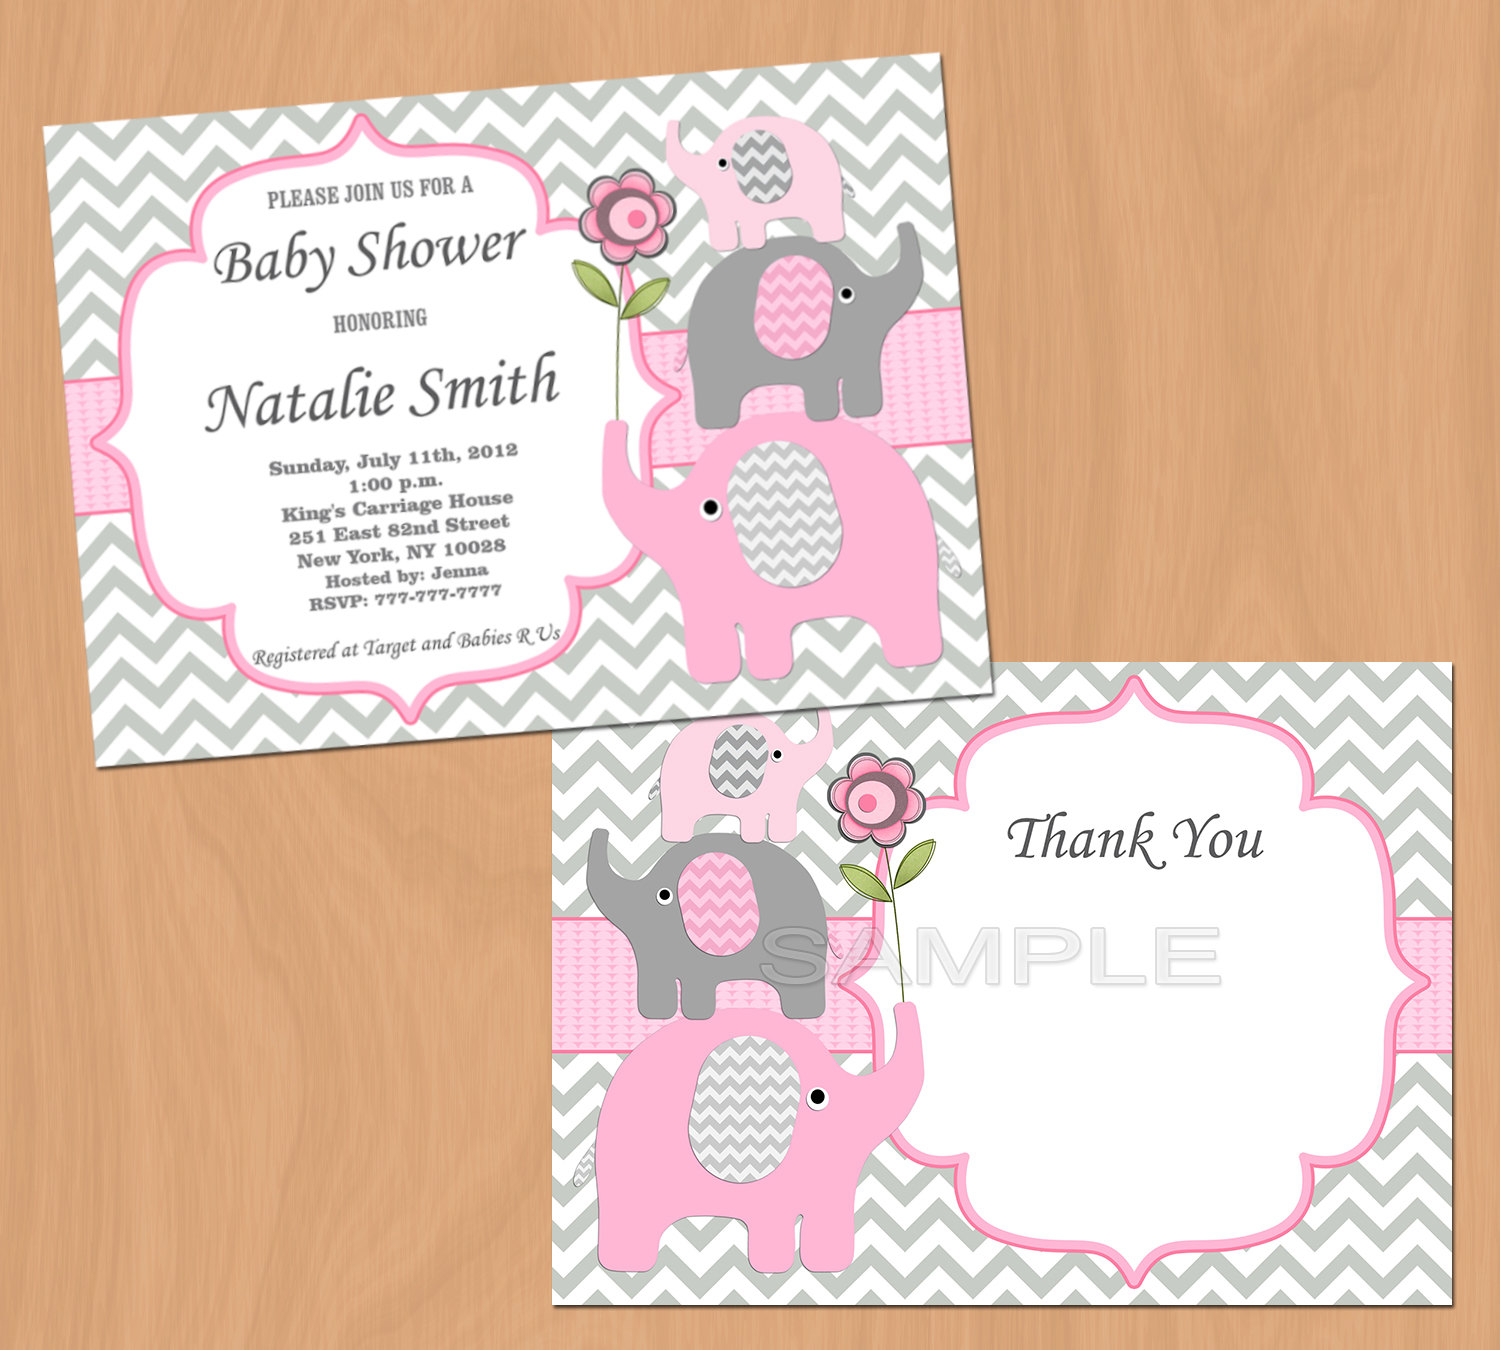 Full Size of Baby Shower:63+ Delightful Cheap Baby Shower Invitations Image Inspirations Cheap Baby Shower Invitations Baby Shower Food Ideas Baby Shower Poems Adornos Para Baby Shower Baby Shower Party Themes Baby Shower Registry Cheap Baby Shower Invitations For Reignnjcom